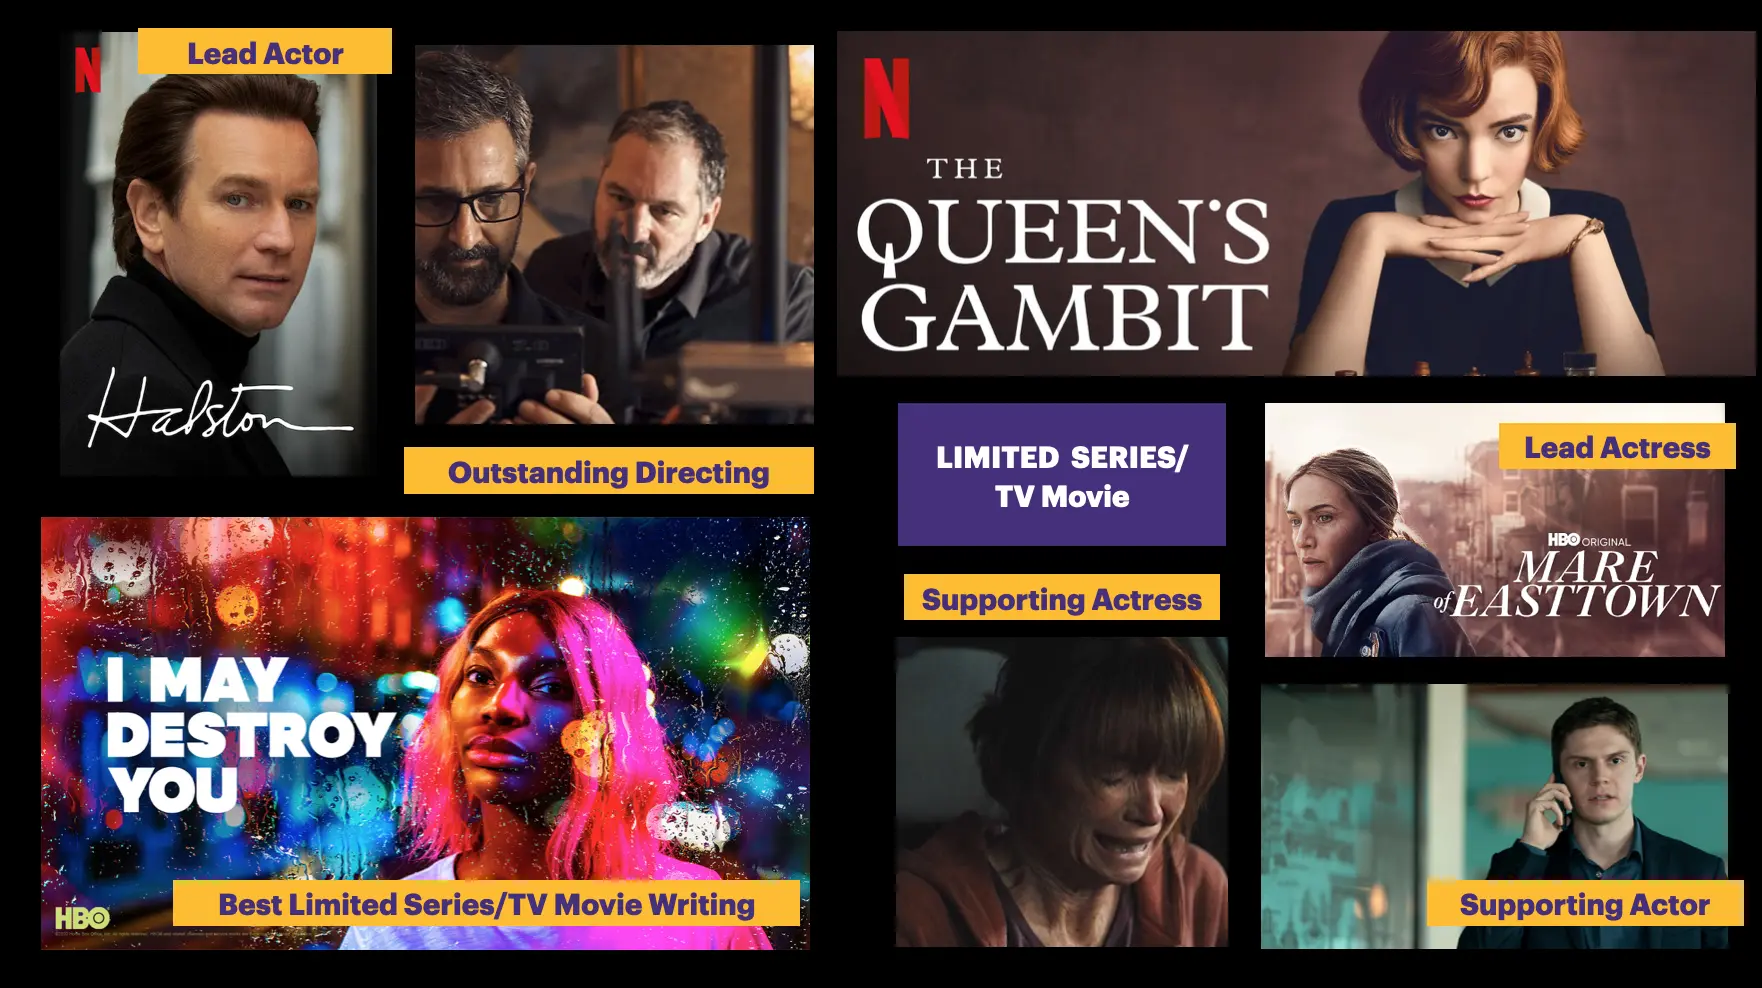 Queen's gambit has won best limited series and it's director for outstanding directing. Other awardees include halston. I may destroy you and mare eastown.